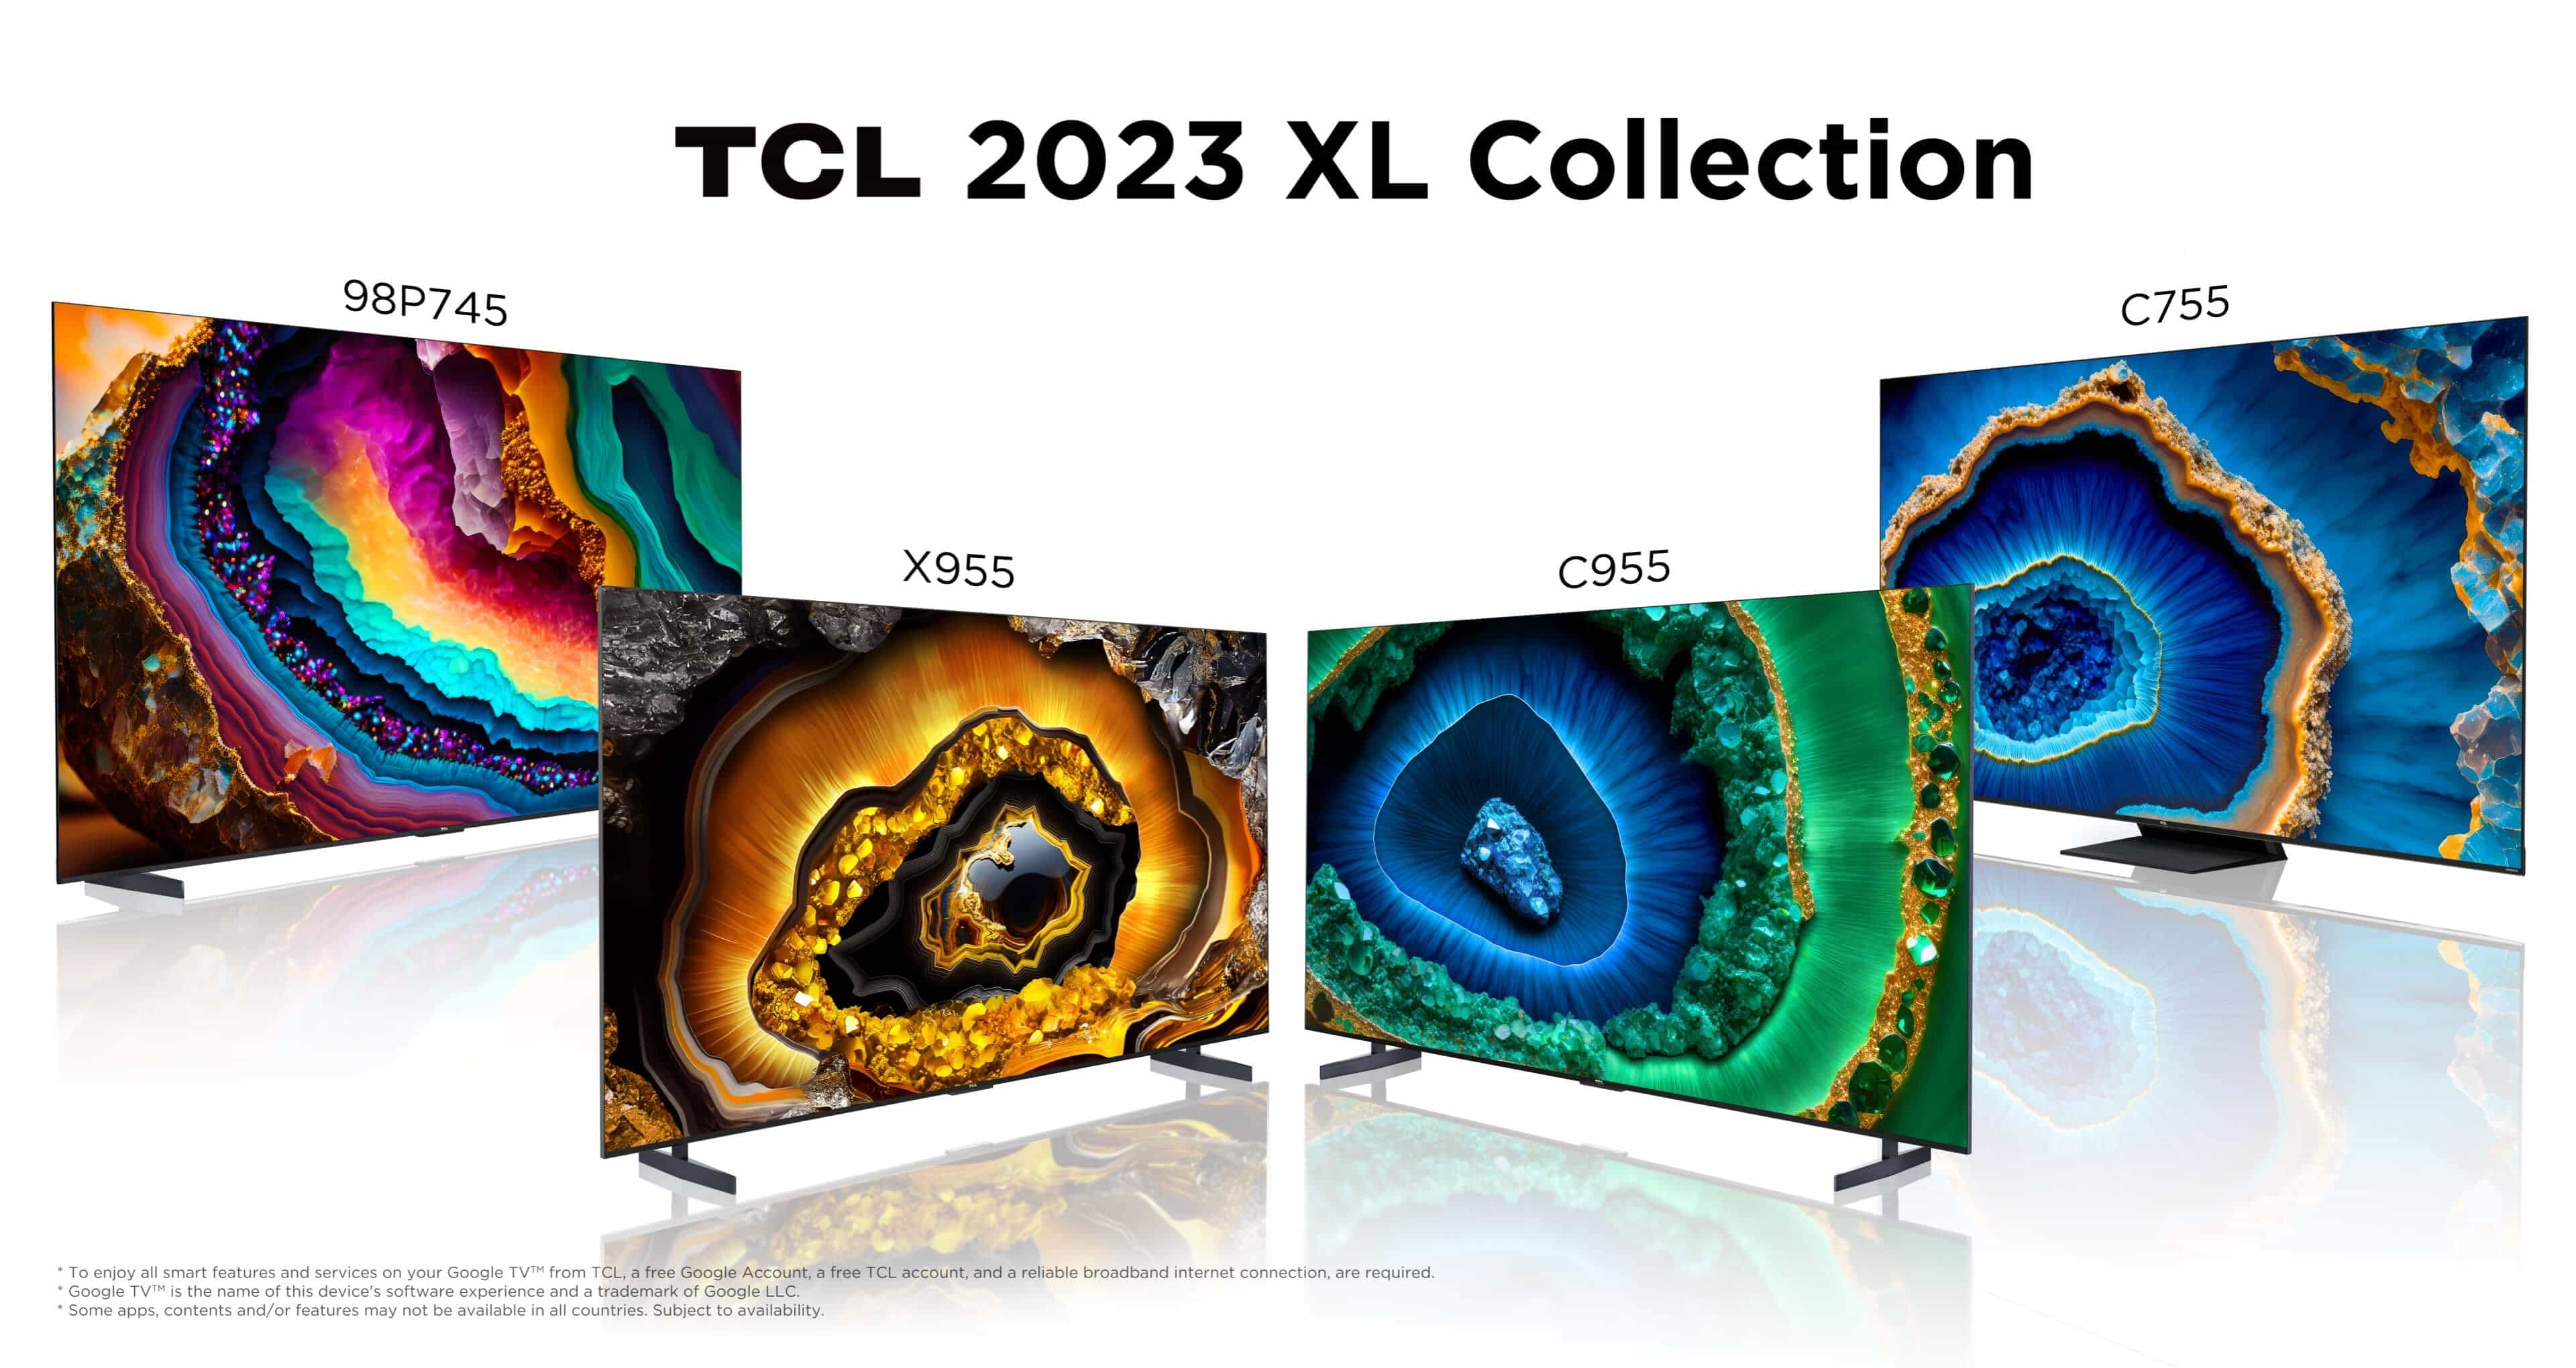 TCL 2023 XL Collection